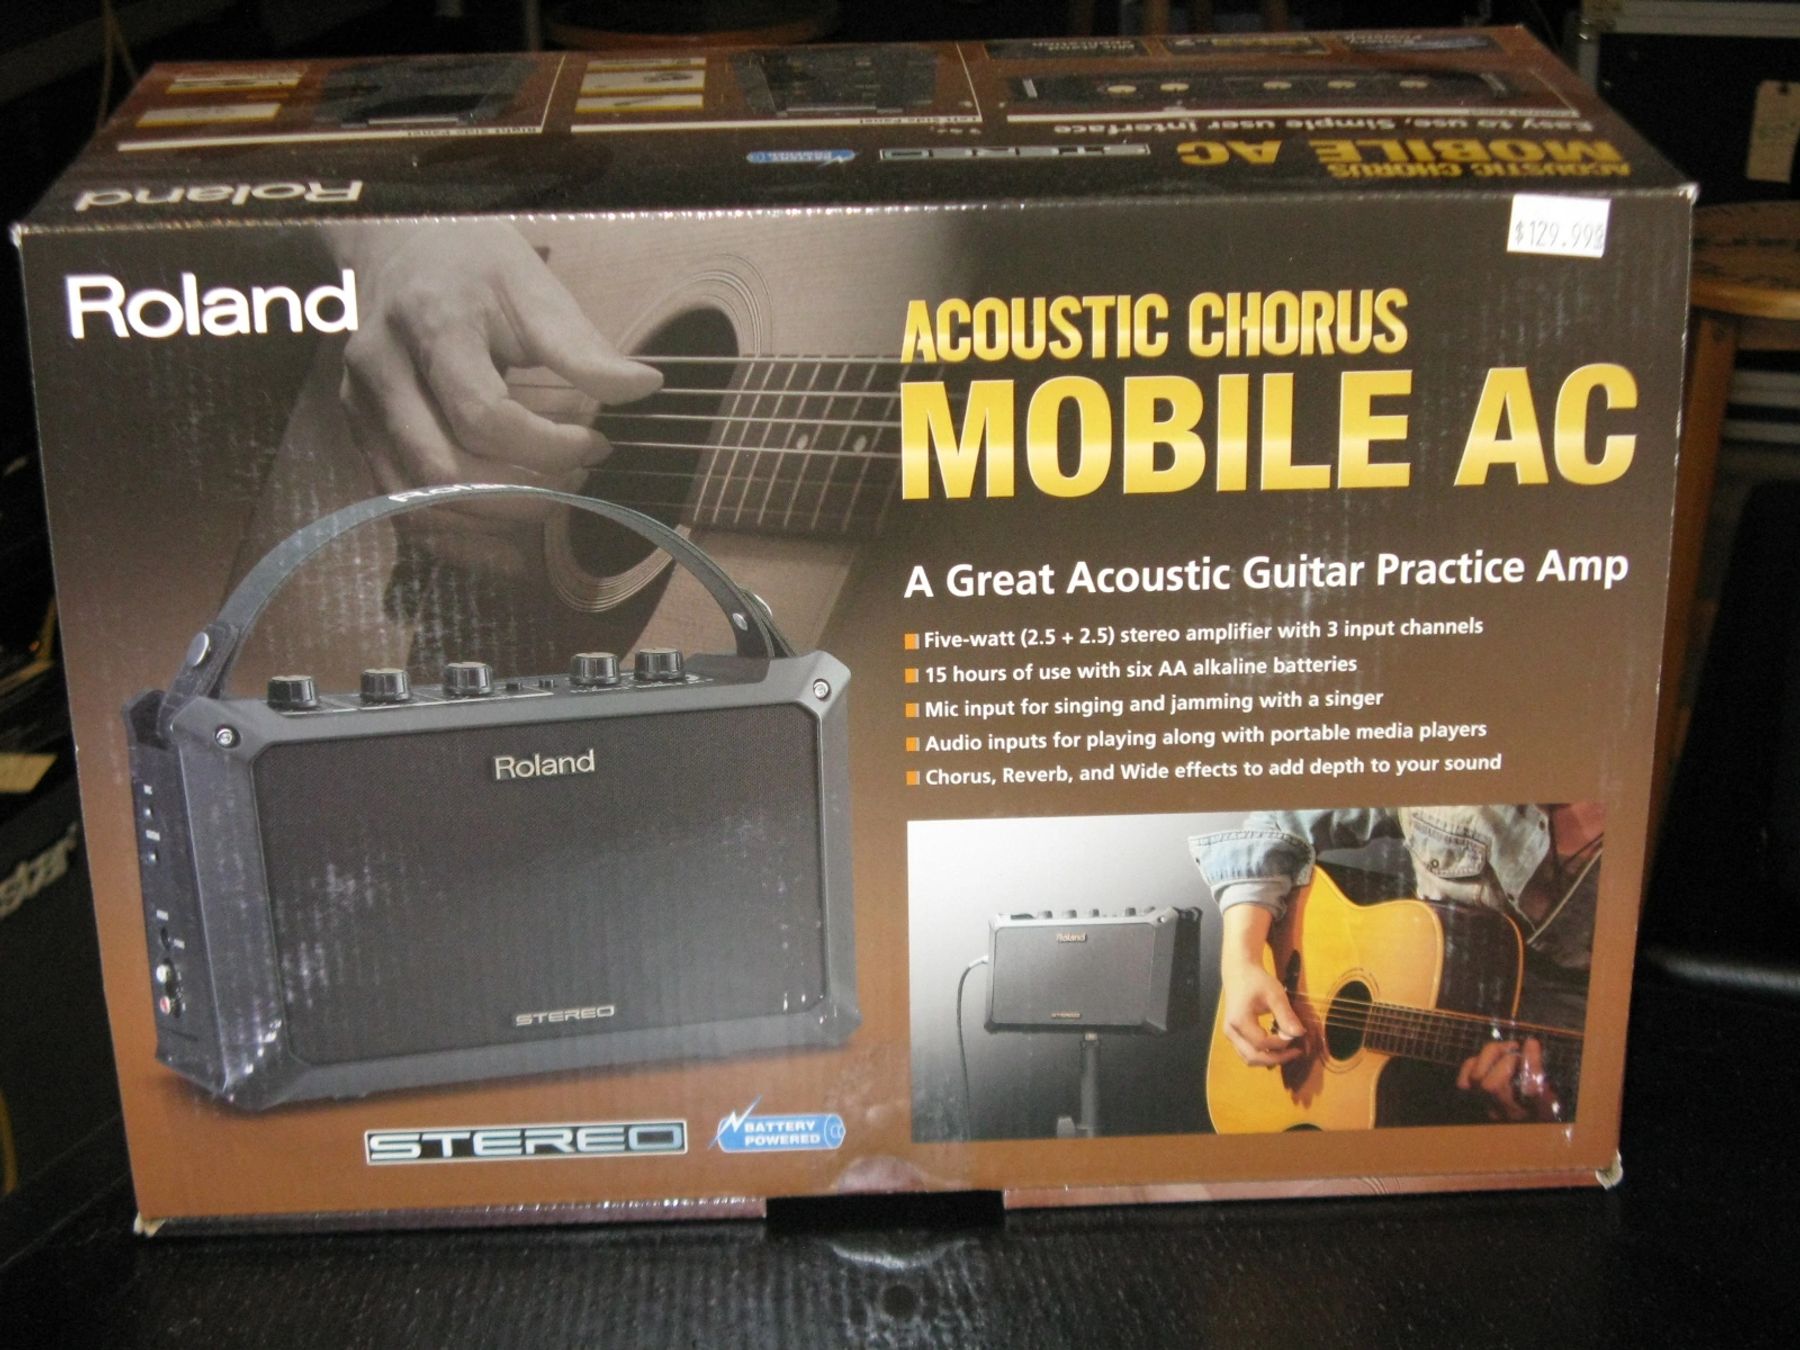 New Roland Acoustic Chorus Mobile AC Amplifier Battery or plugged in!